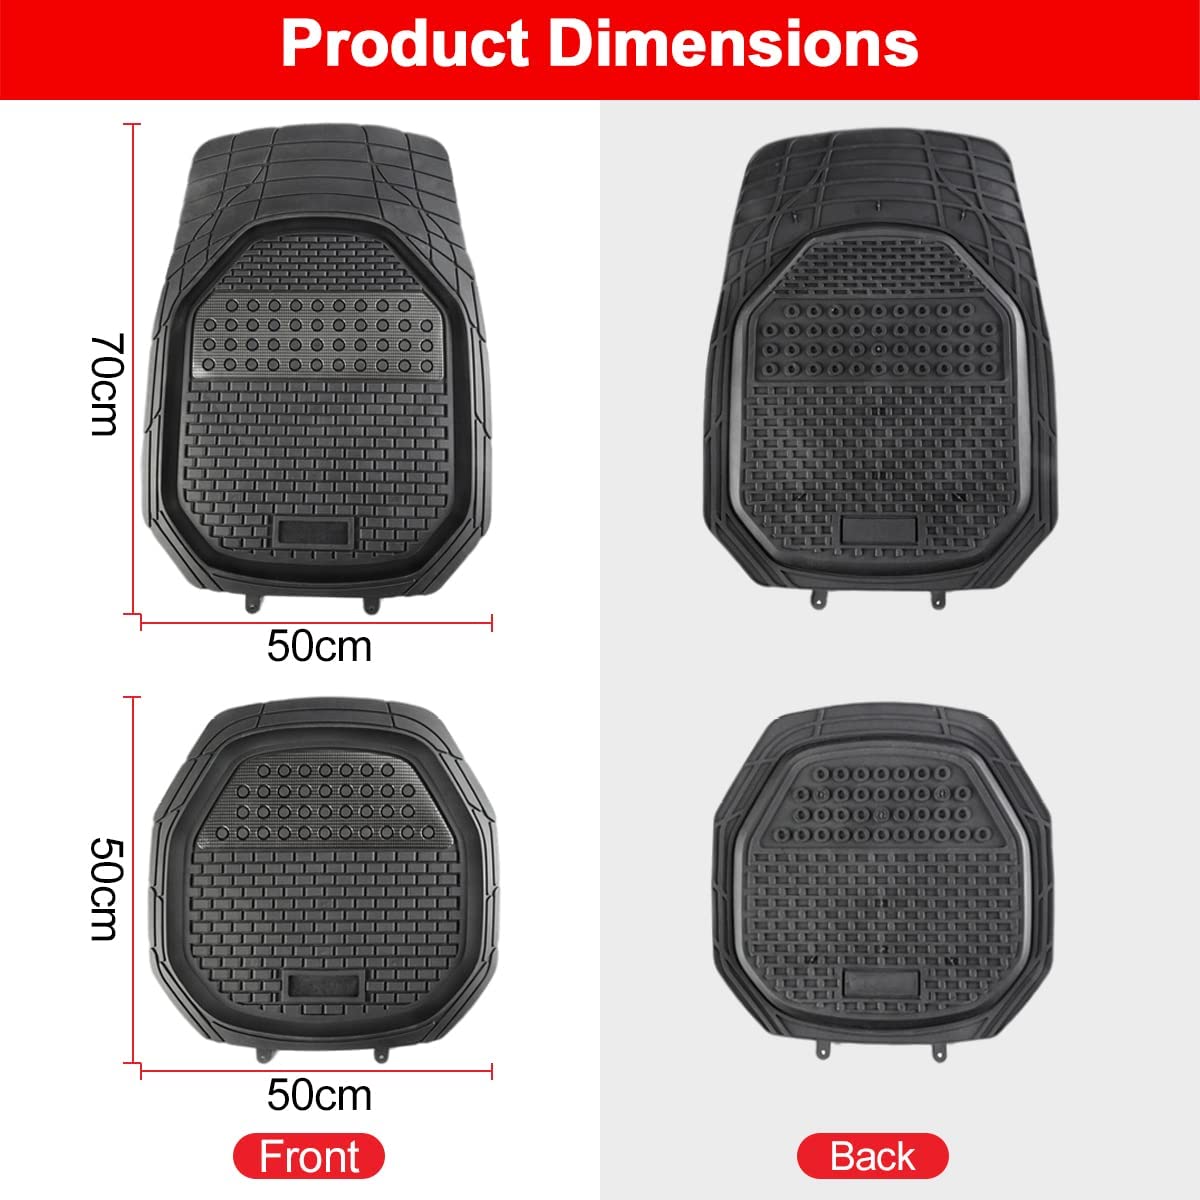 VIO Automotive Floor Mats Black Universal Fit Heavy Duty Rubber for all weather protection fits most Cars, SUVs, and Trucks, 4 Piece